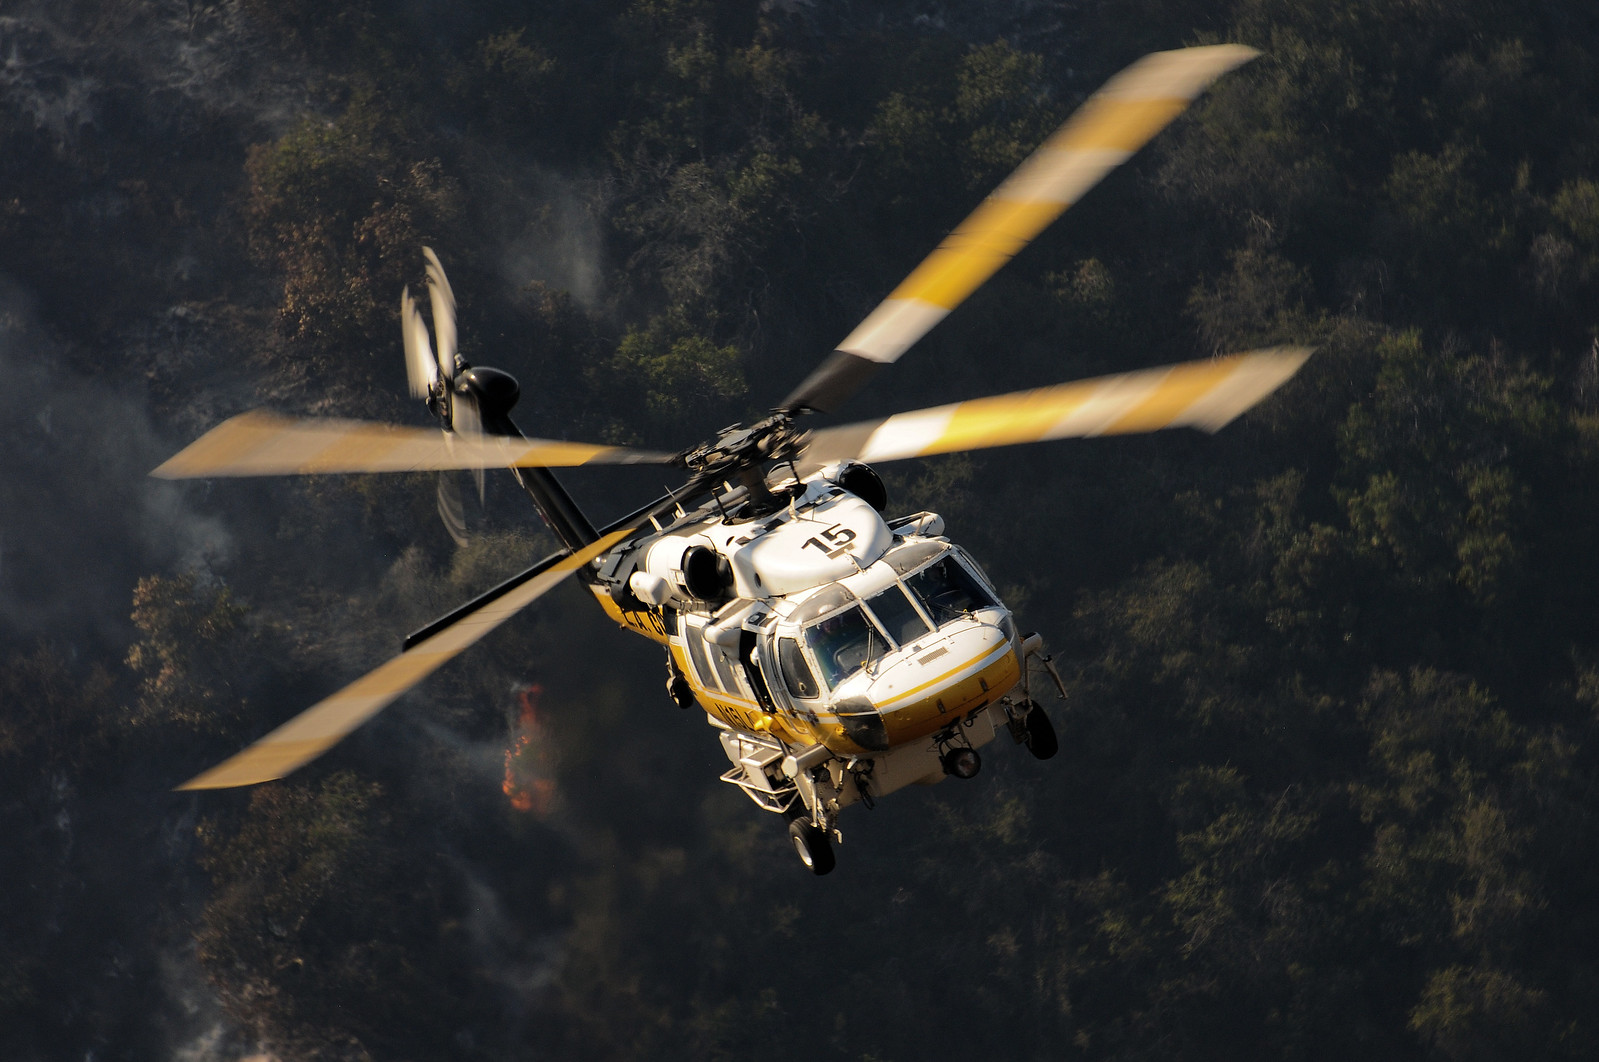 Among improved safety features, the S-70i aircraft includes a terrain and obstacle avoidance system that alerts aircrew to the proximity of potential hazards on the ground.